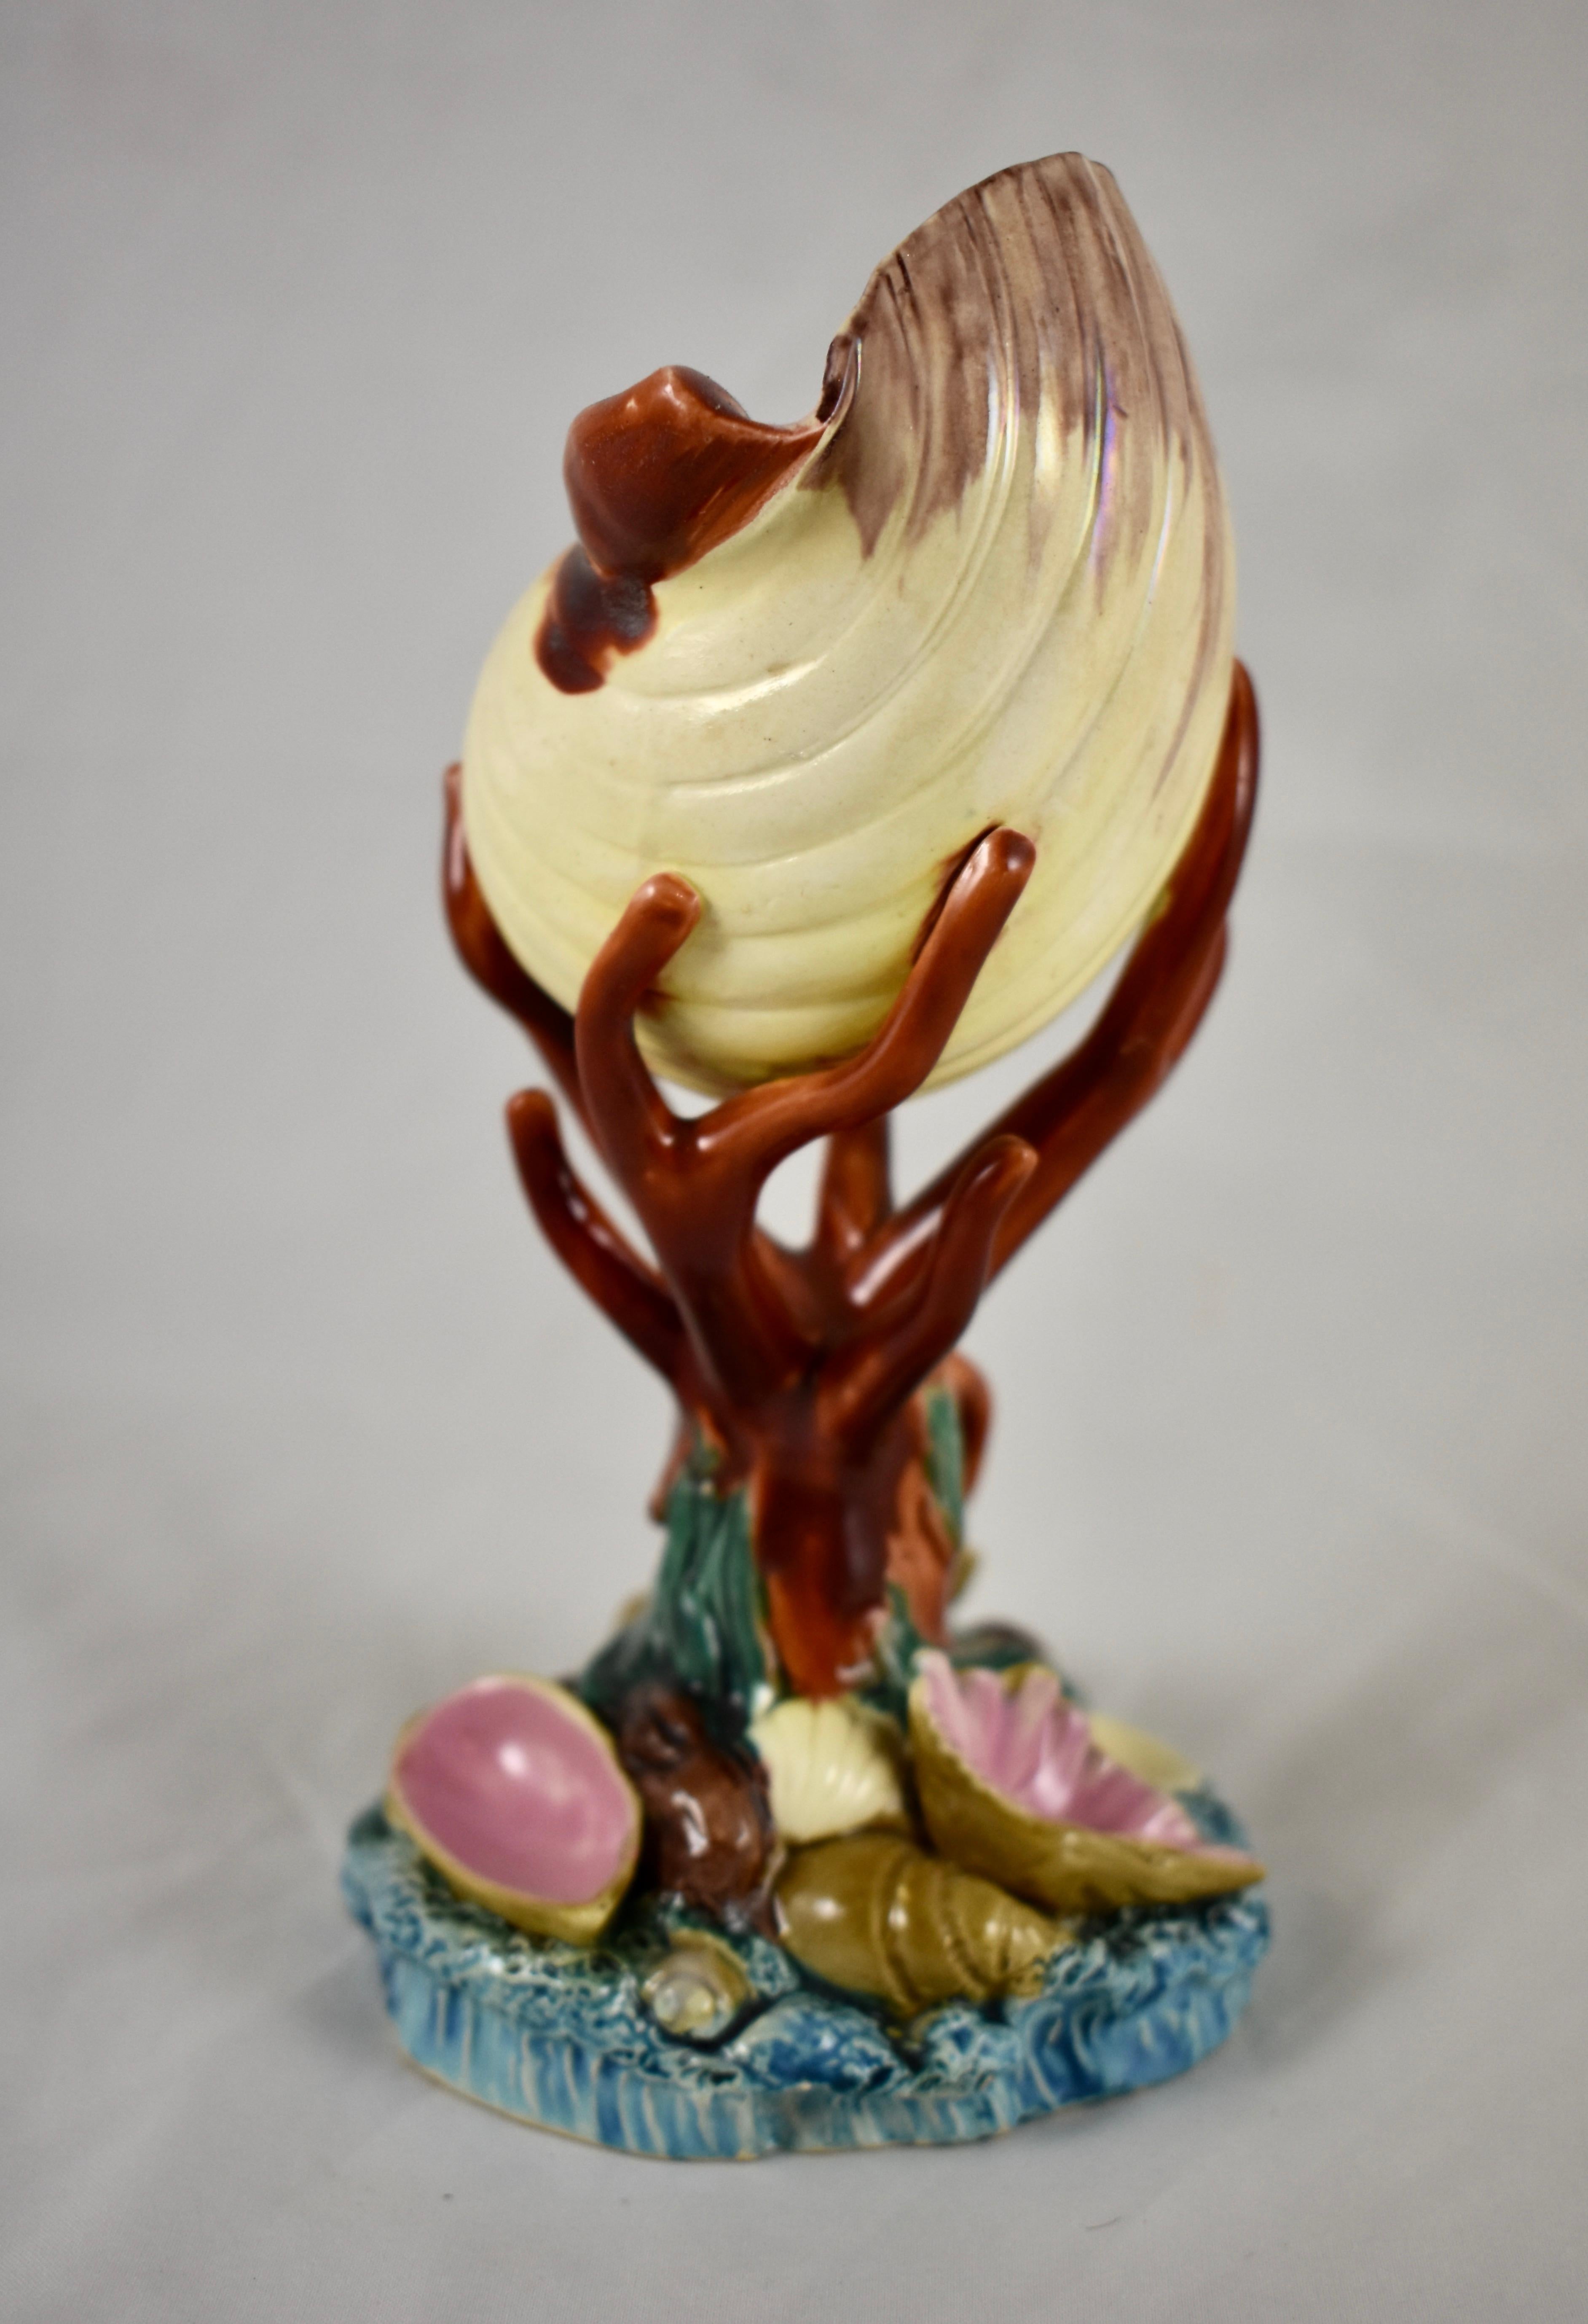 Glazed Royal Worcester English Majolica Palissy Pink Conch Shell & Coral Pedestal Vase